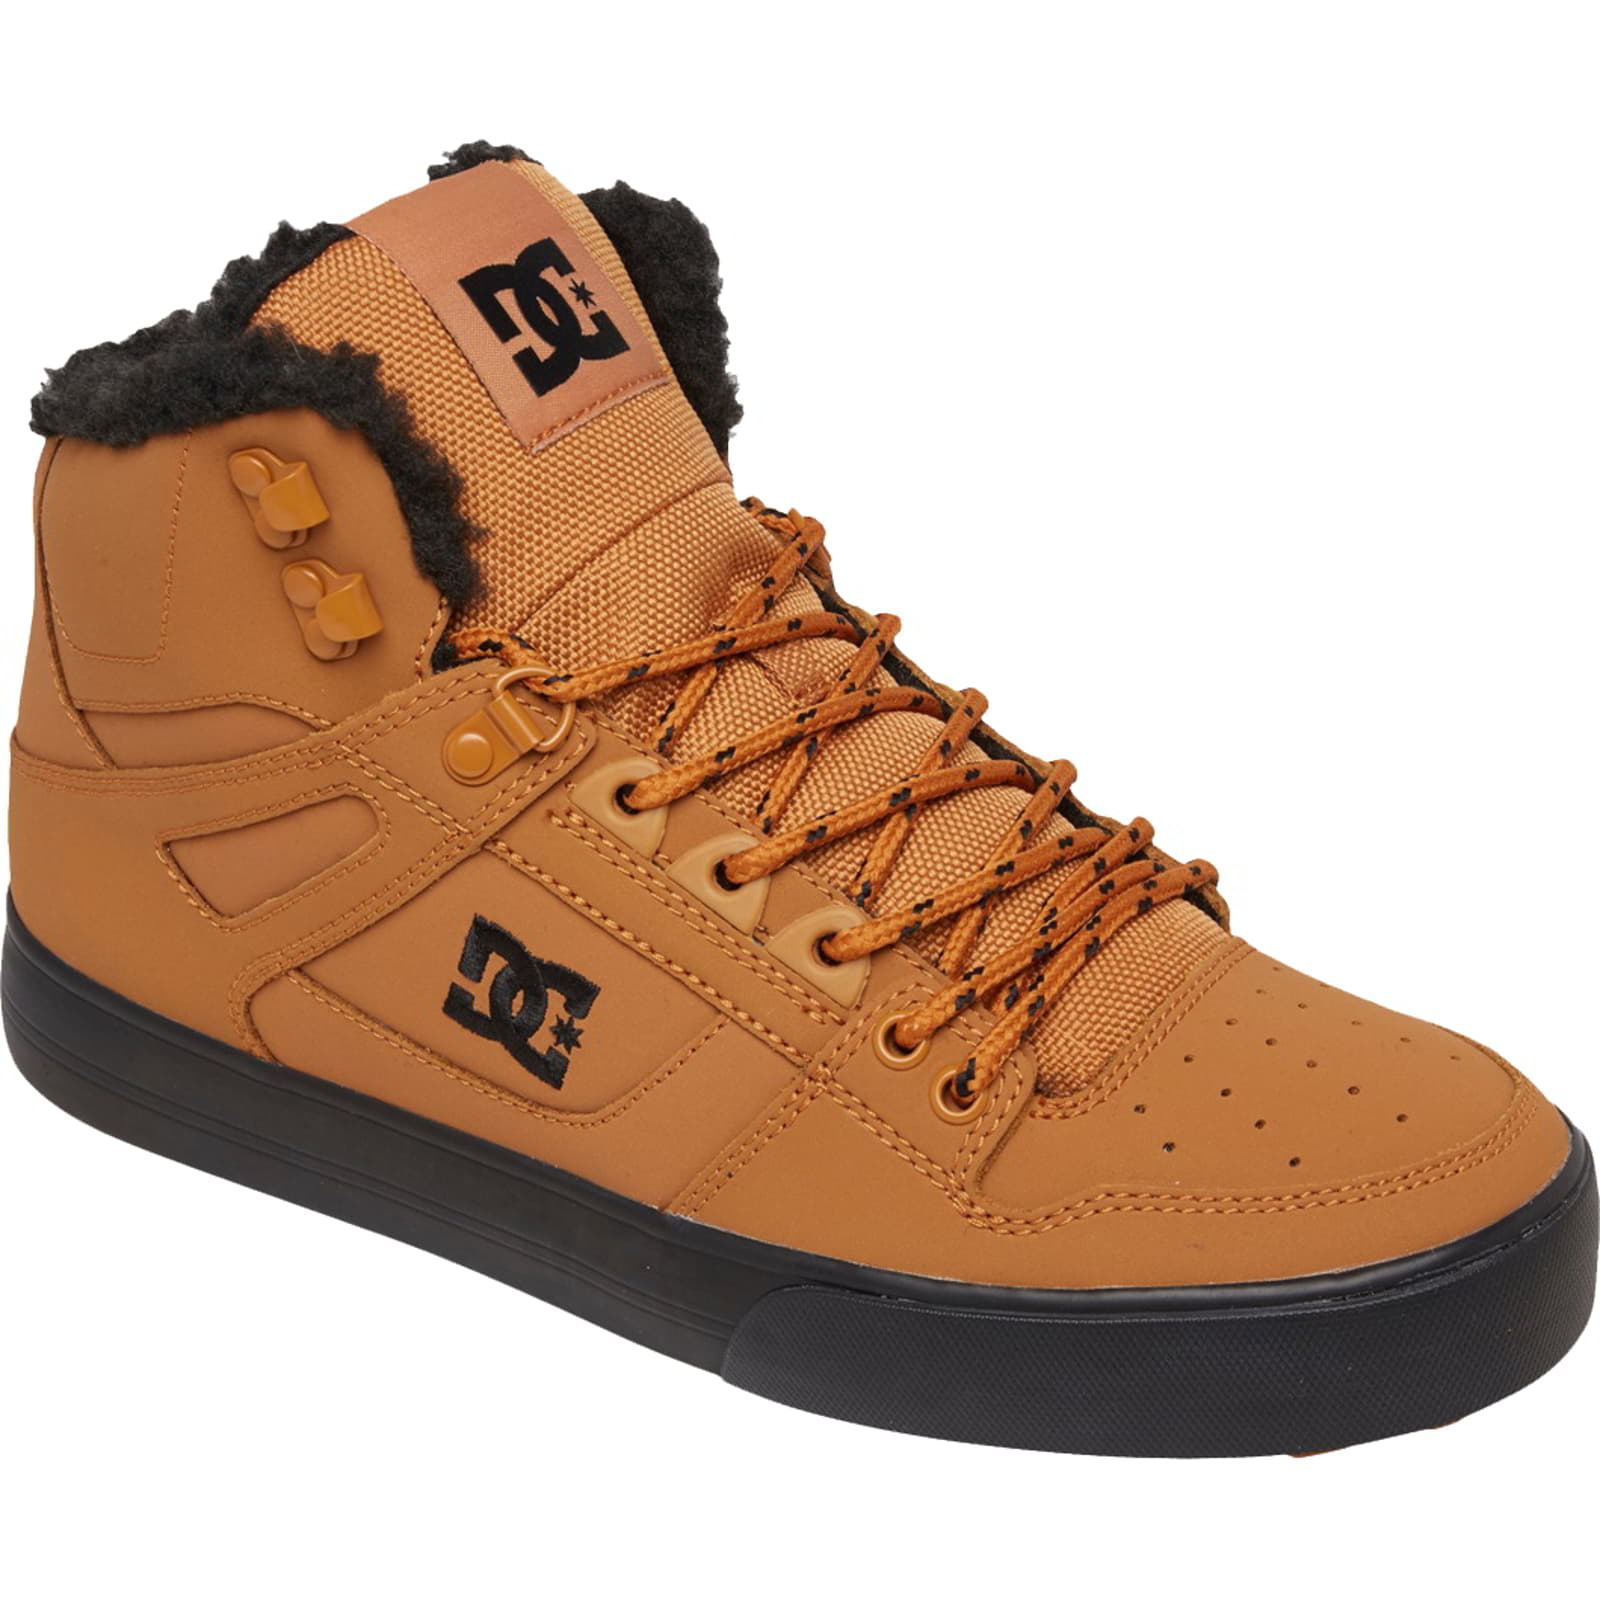 DC Men's Pure High Top WC WNT Hi Top Skate Shoes Trainers - UK 9 / US 10